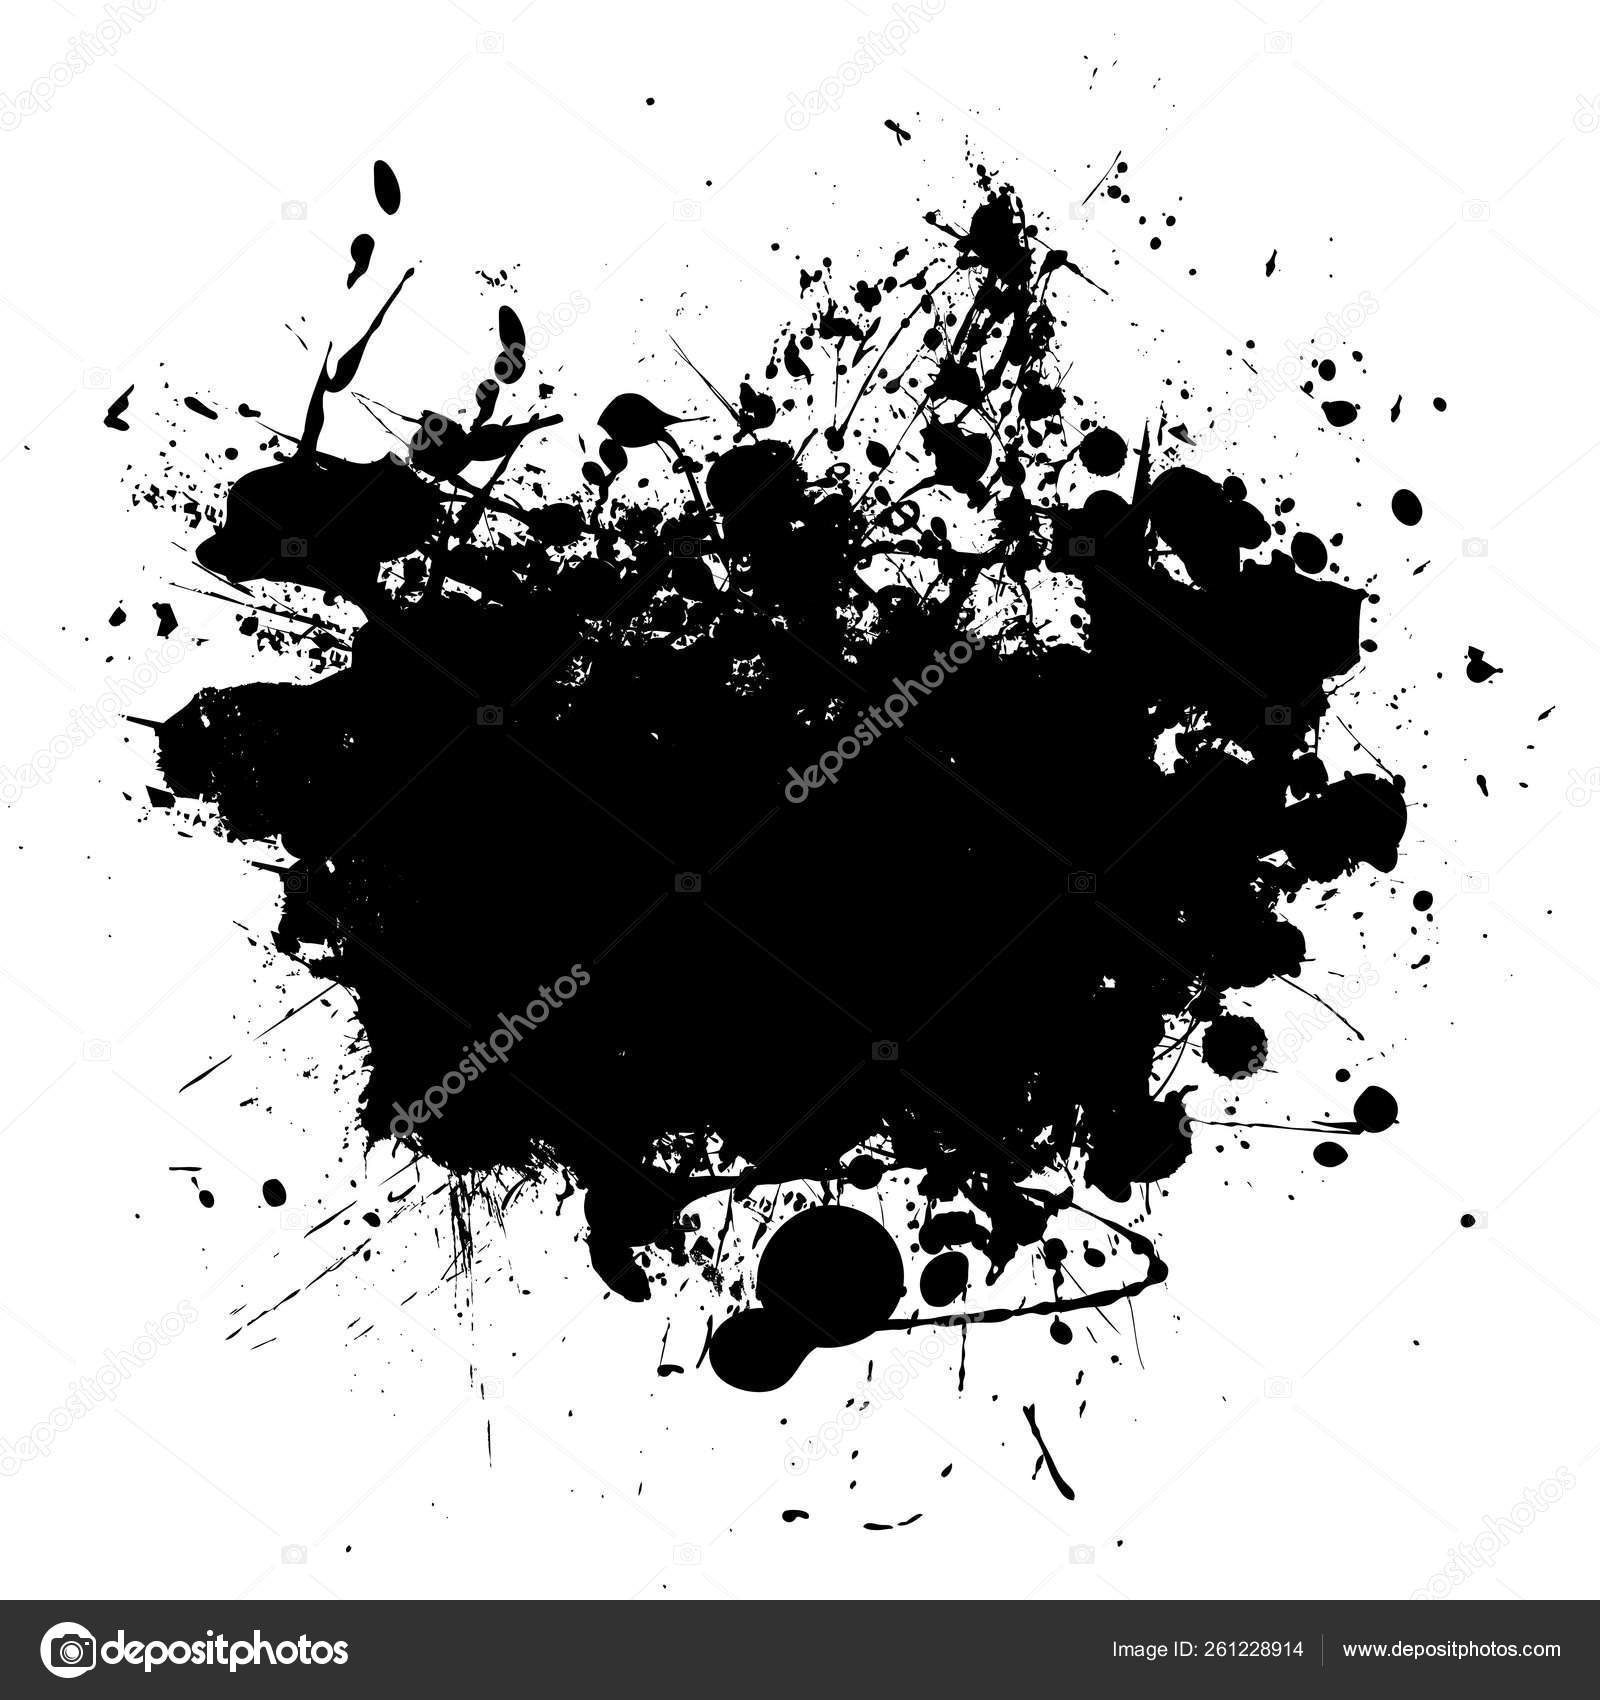 Abstract Black Ink Splat Design Room Add Your Own Copy Stock Photo by ...